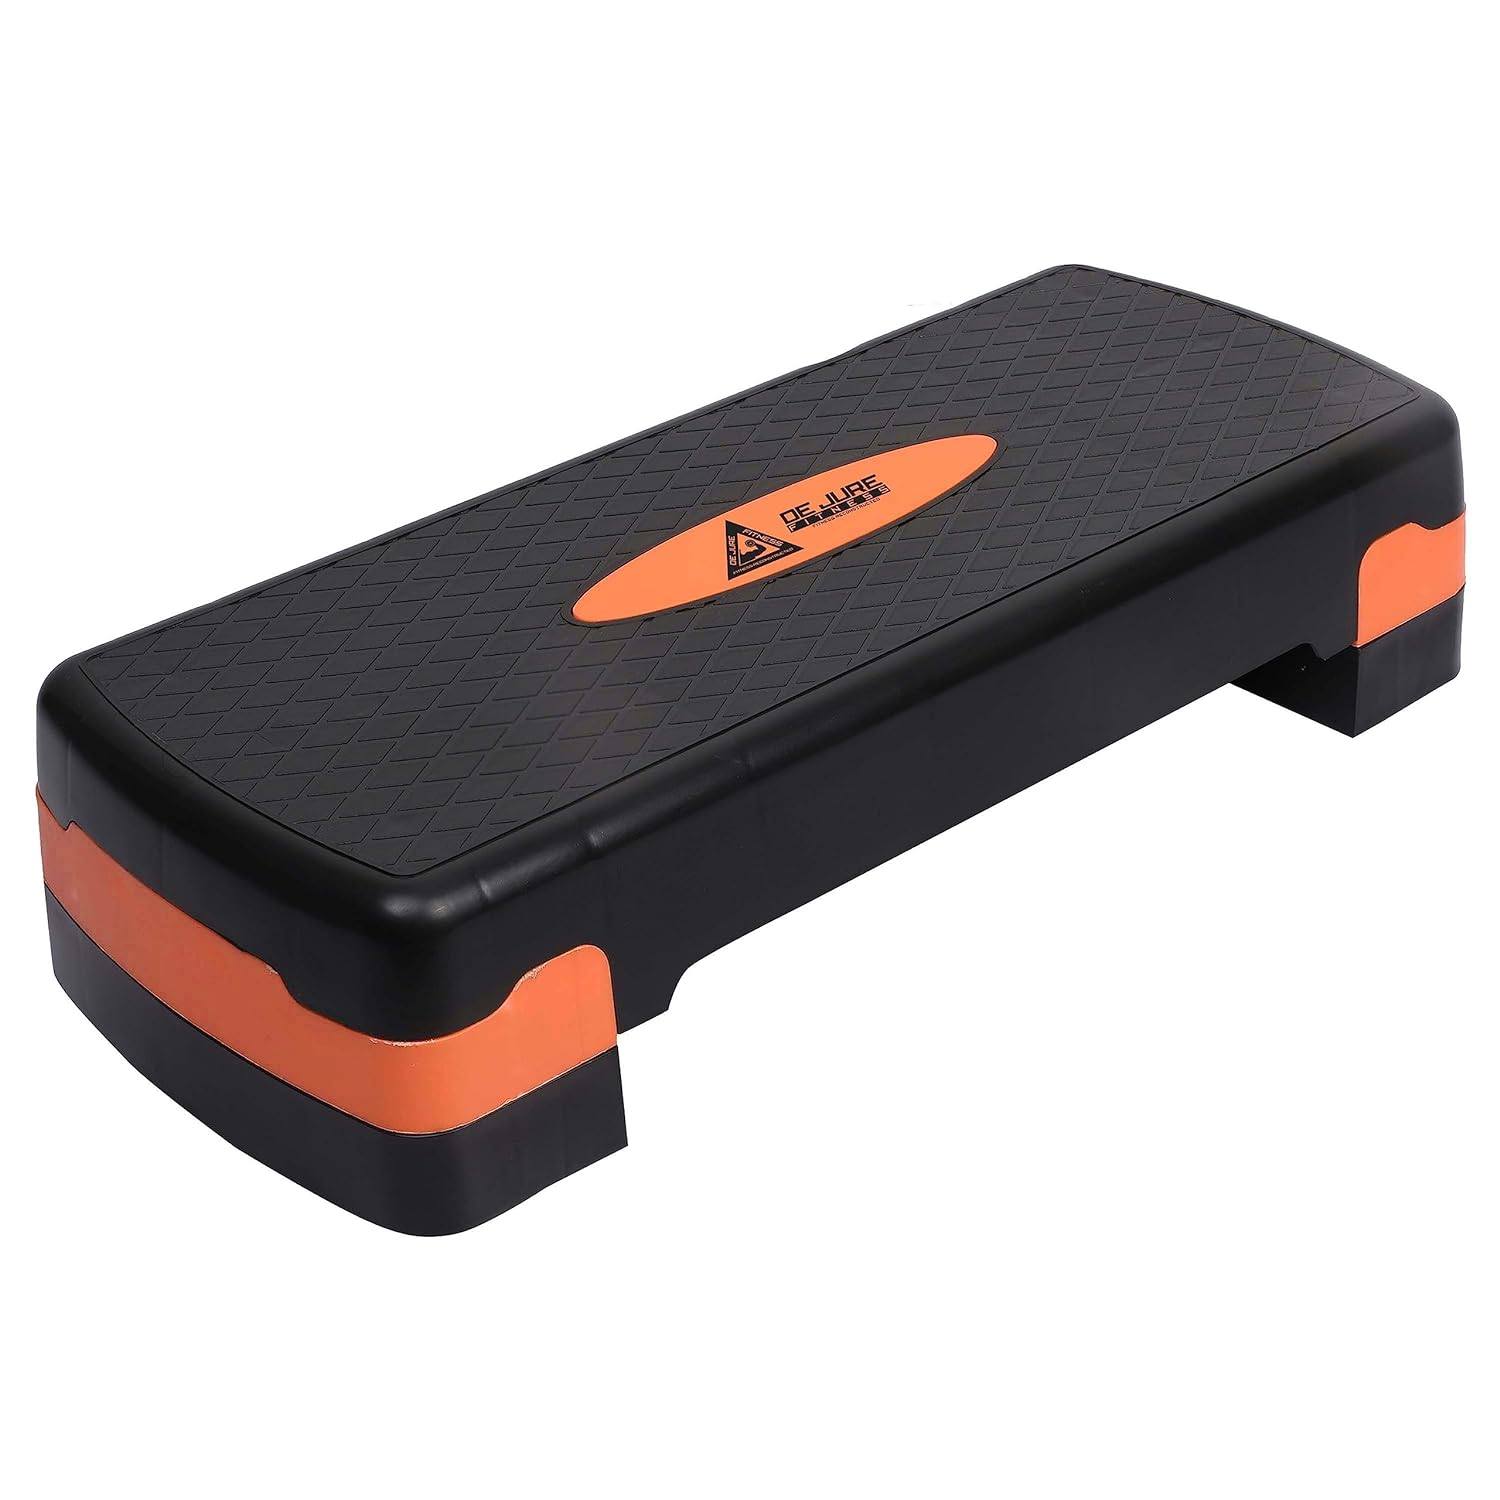 De Jure Fitness Aerobic Stepper, Two Height Level Adjustments - 4 inches and 6 inches, Slip-Resistant & Shock Absorbing Platform for Extra-Durability, Supports Upto 200 KG, (Orange)